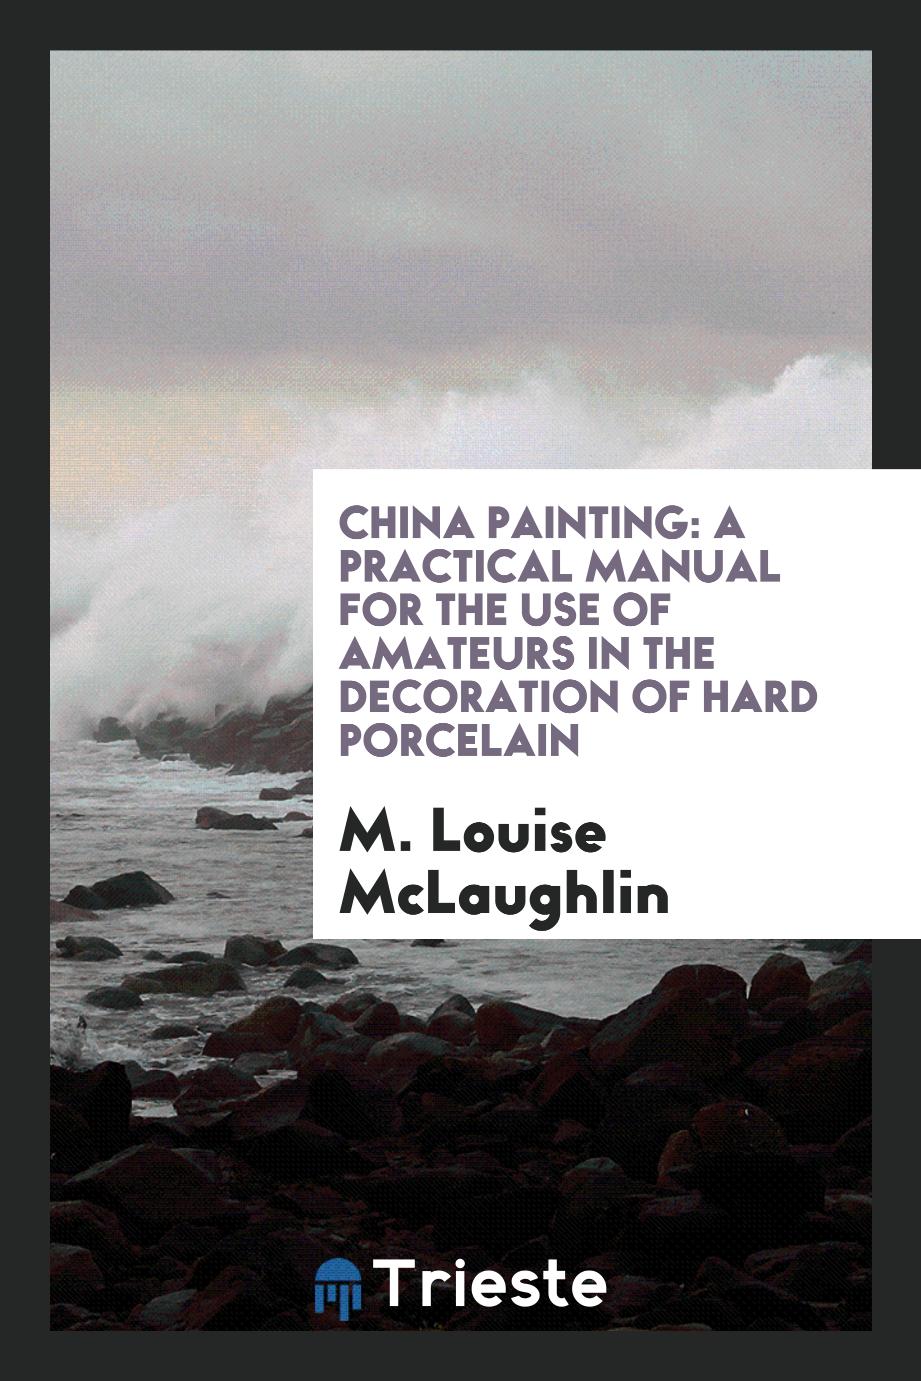 China painting: a practical manual for the use of amateurs in the decoration of hard porcelain